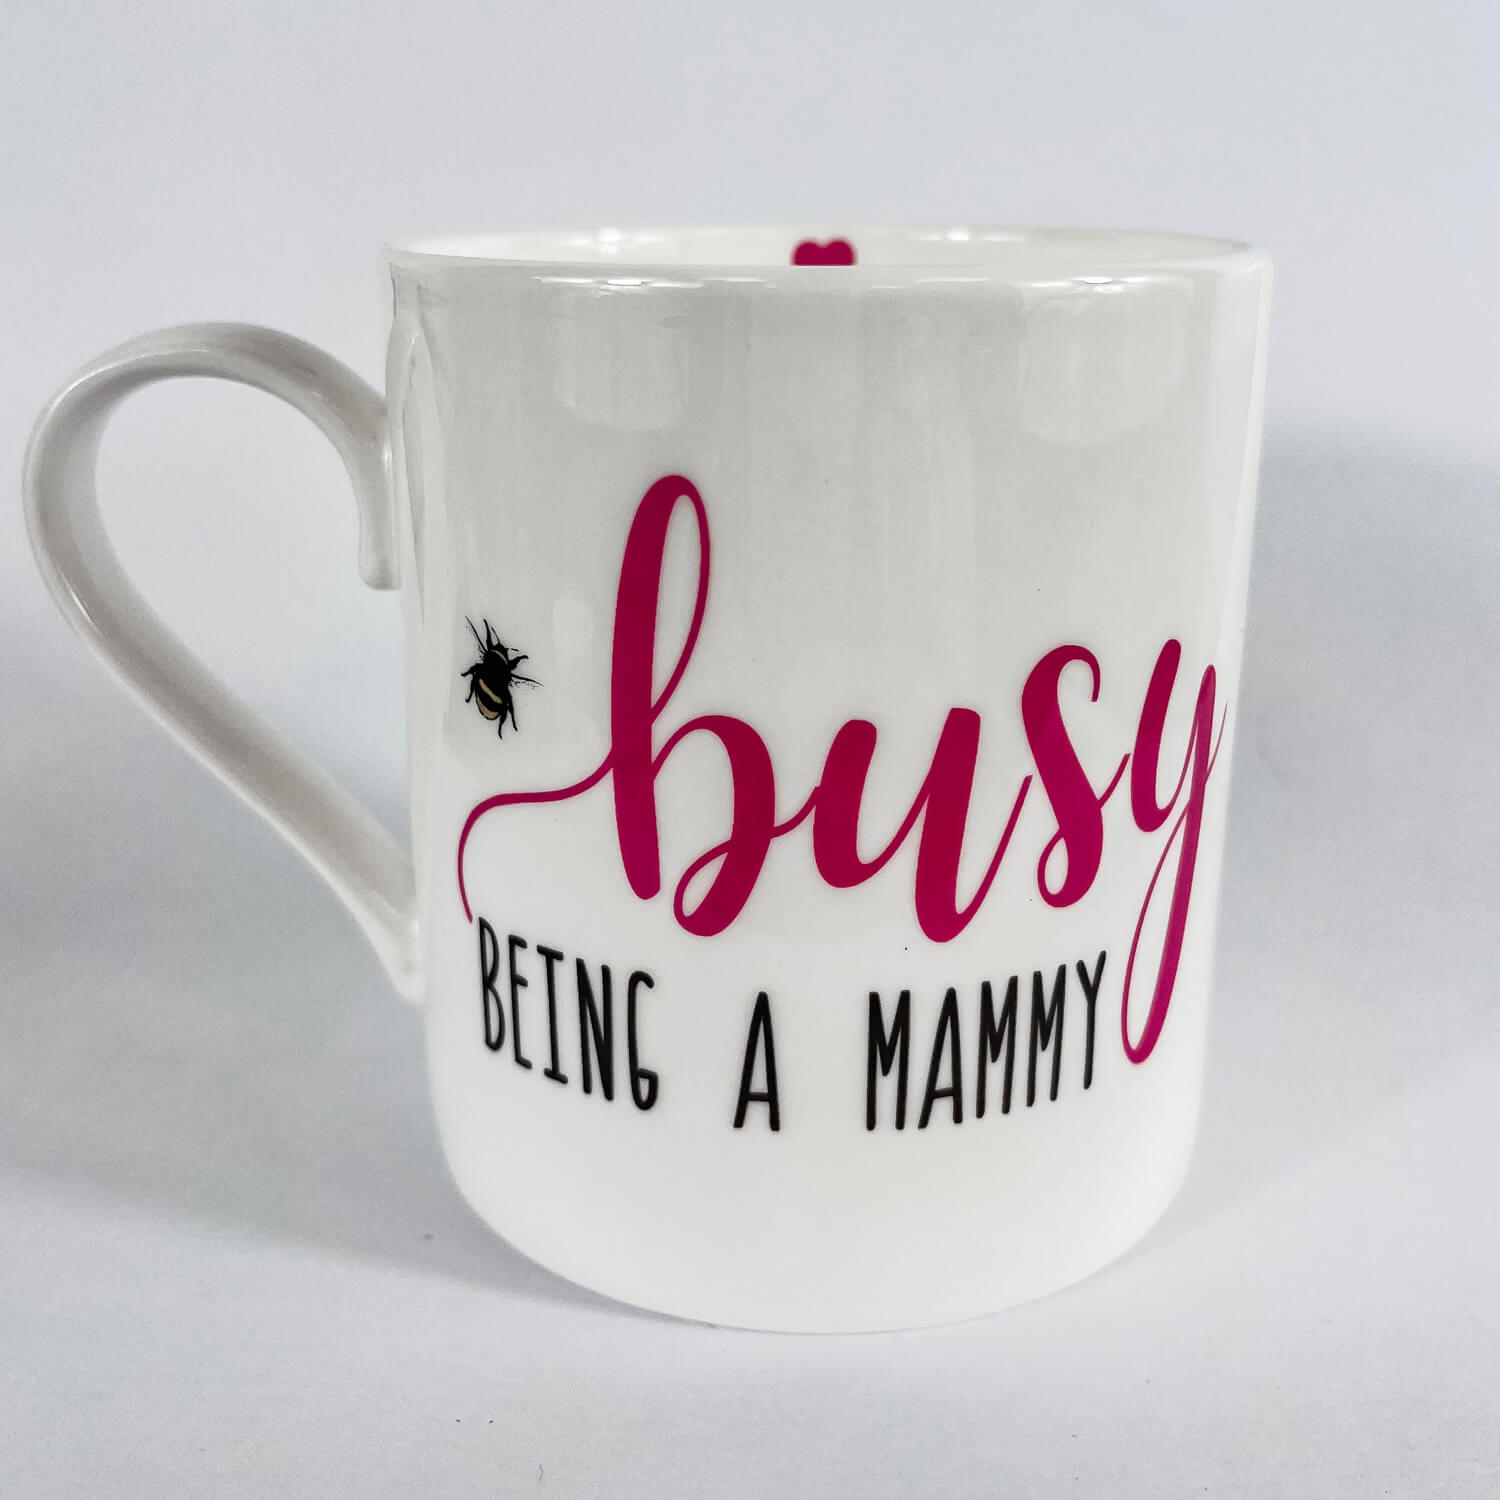 Love The Mug Busy Being A Mammy 1 Shaws Department Stores